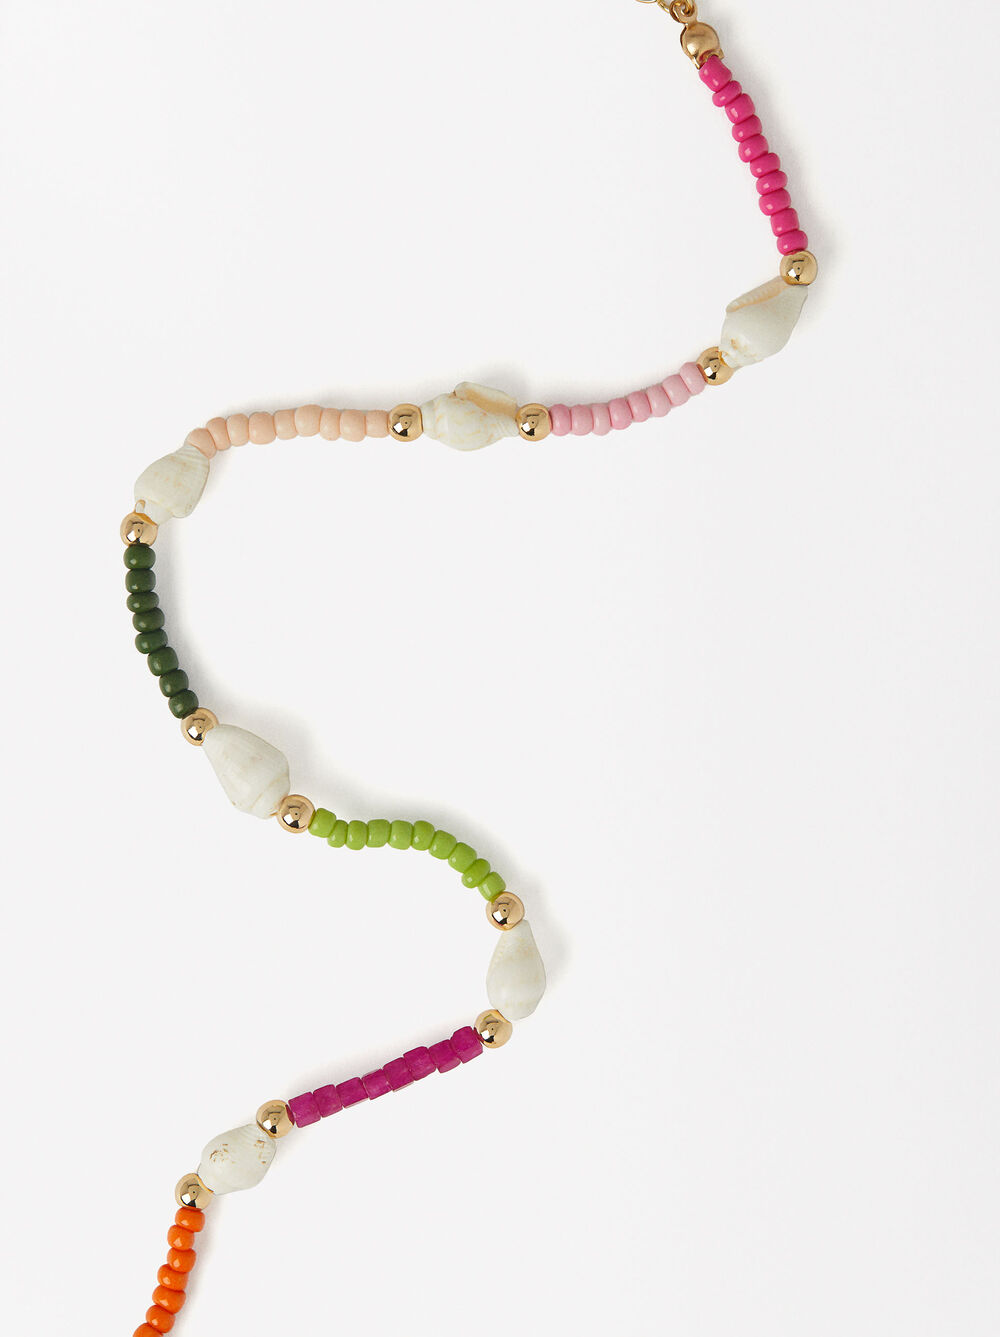 Anklet Bracelet With Shells And Beads